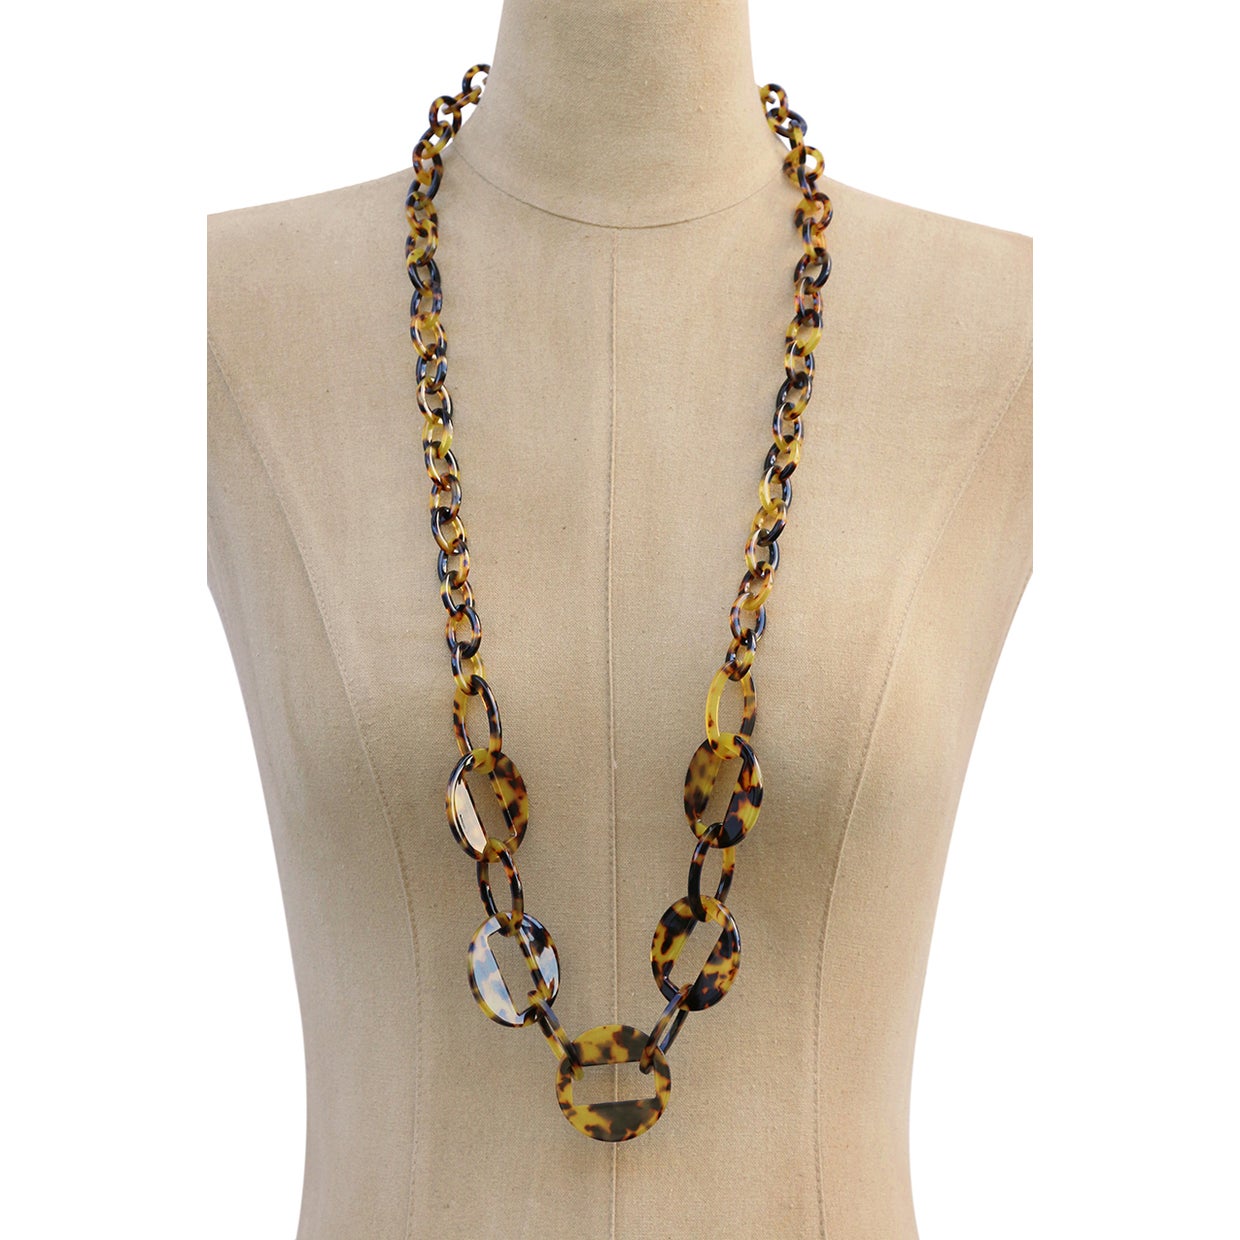  Tortoise Shell Style Chain & Link Necklace SPRING SPECIAL